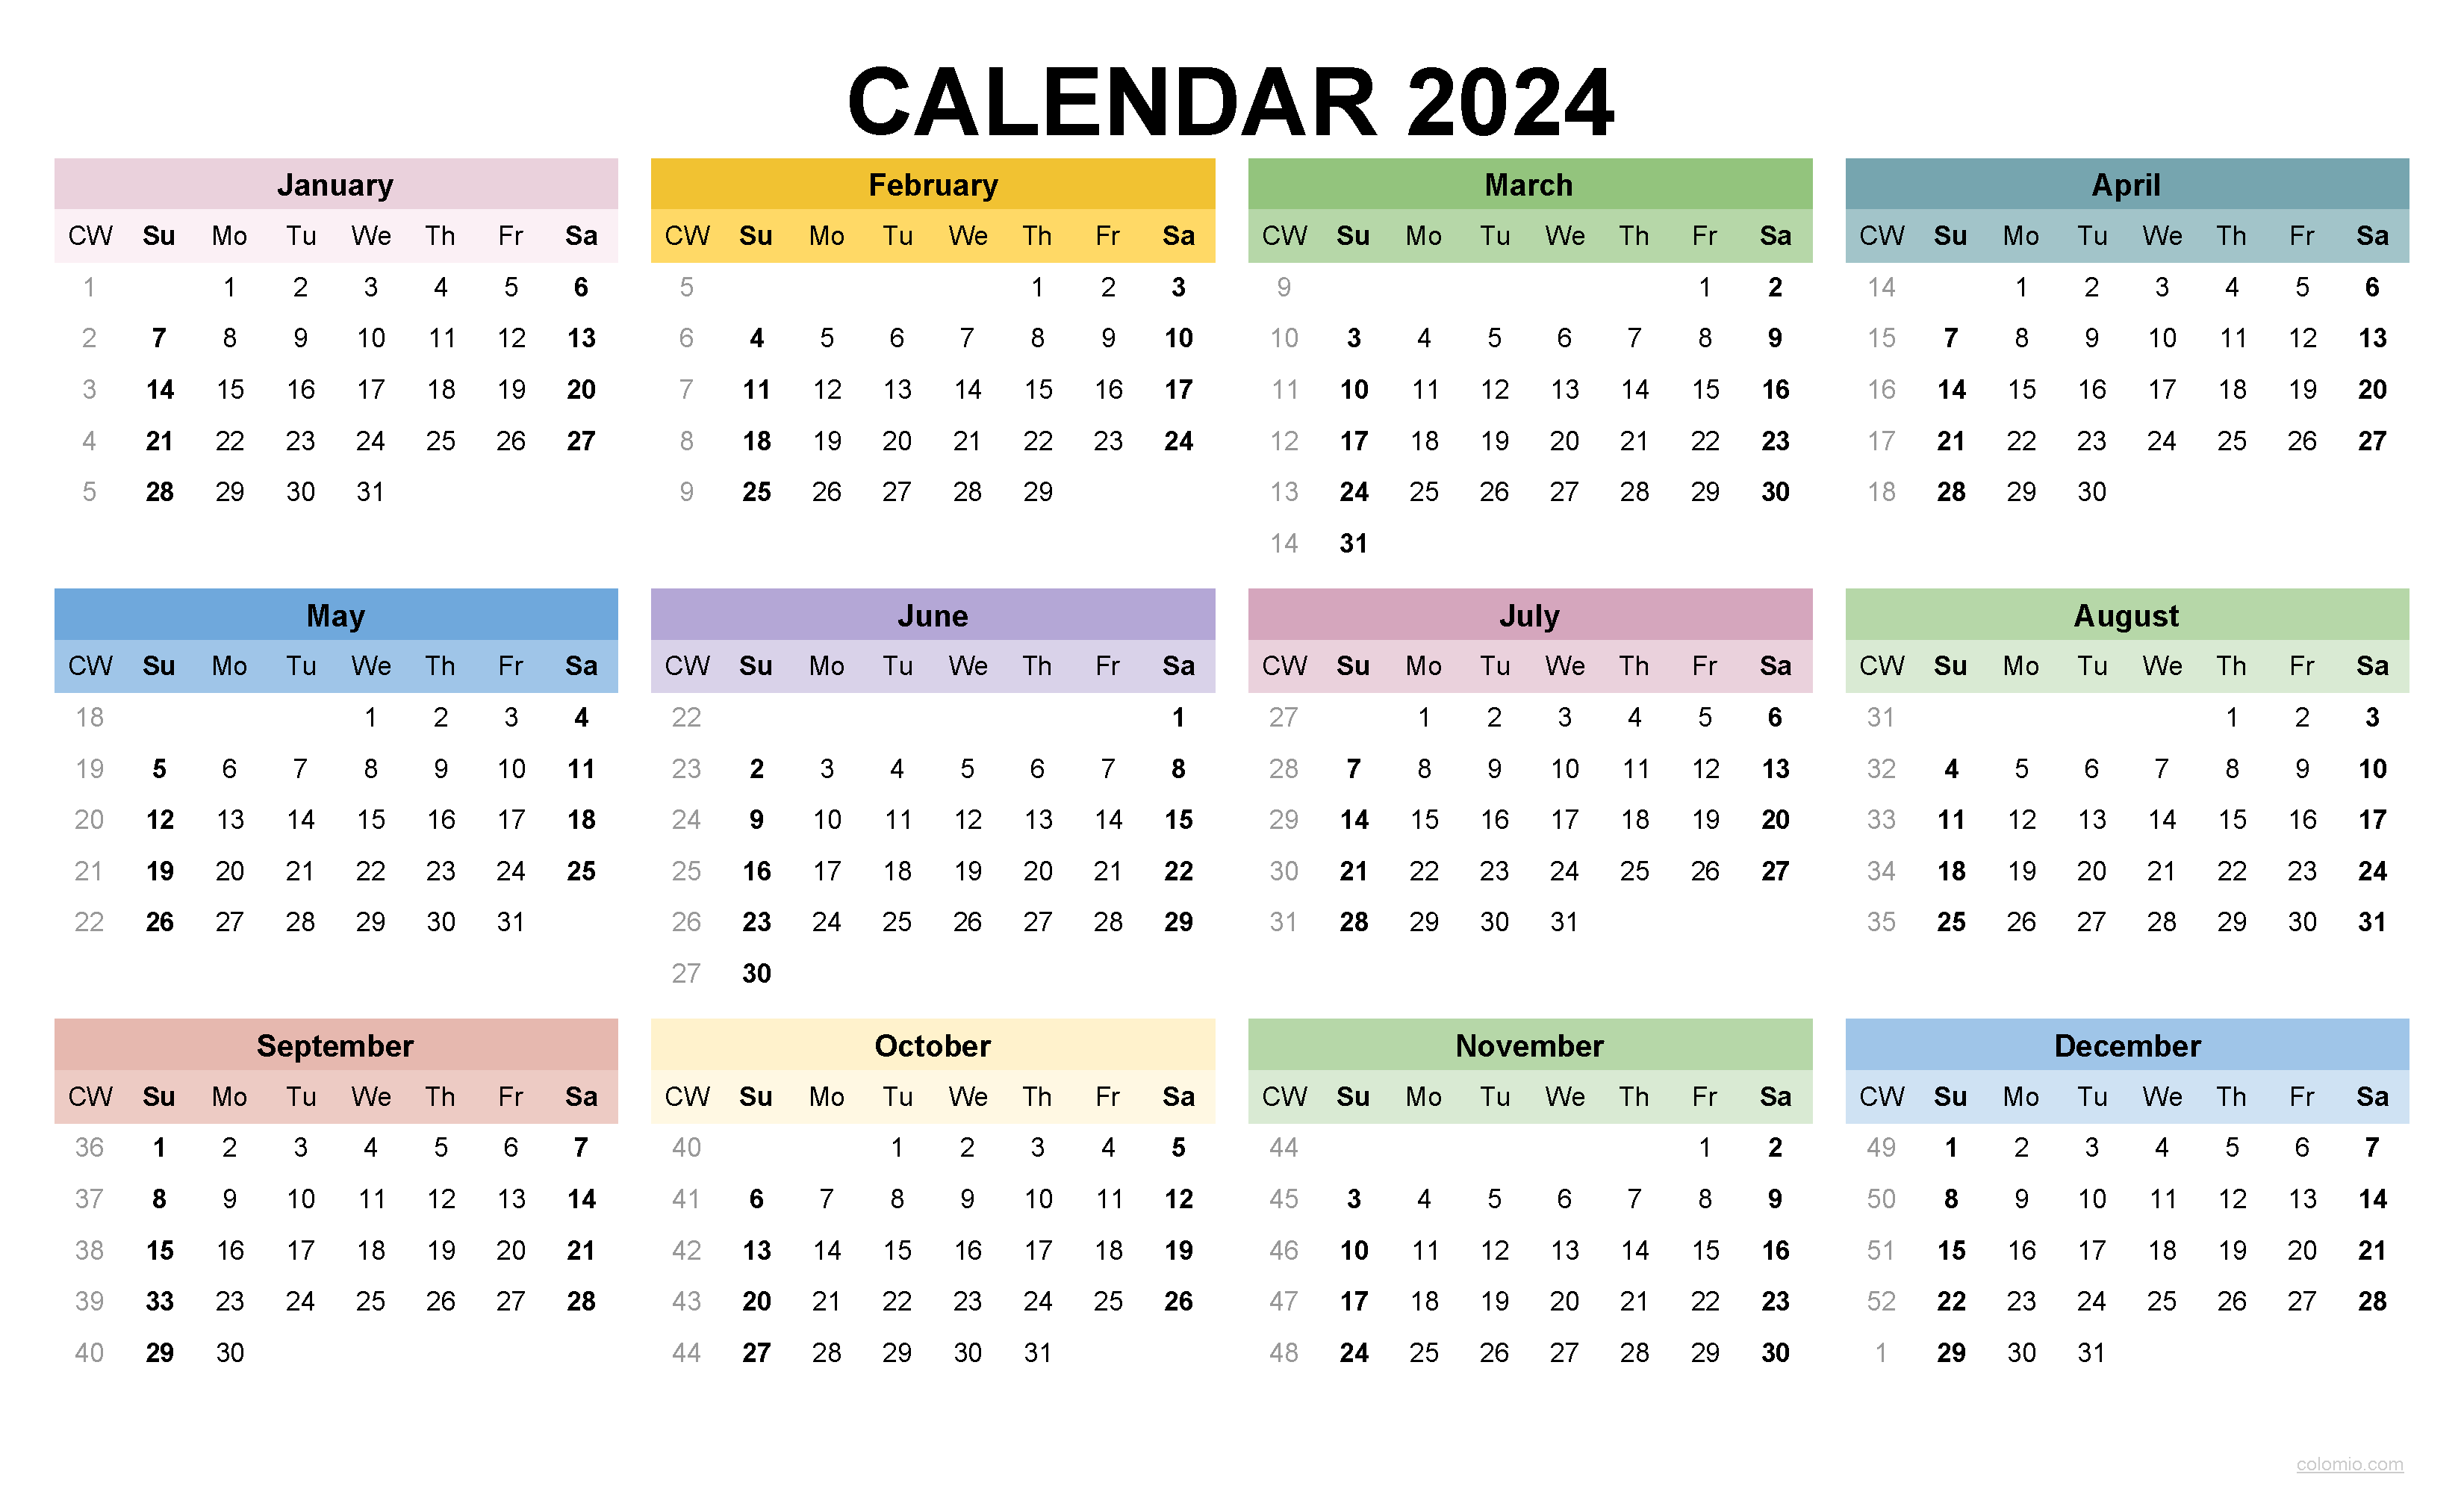 2024 Calendar Printable, ✓ Pdf, Excel And Image File - Free intended for Free Printable Calendar 2024 With Holidays 2 Column